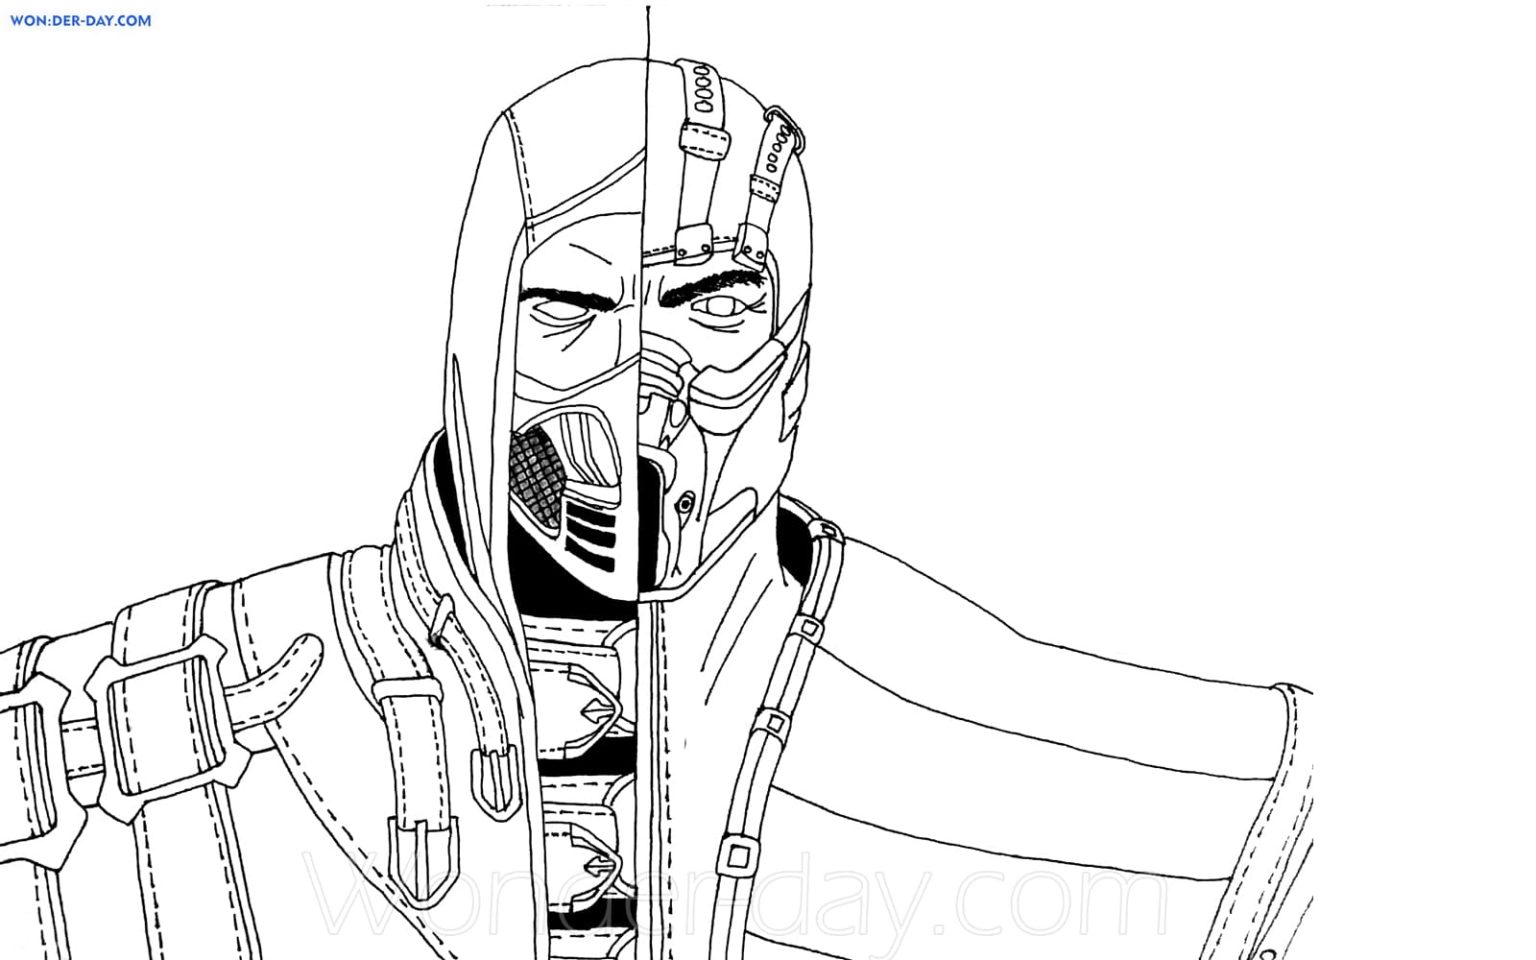 Sub Zero coloring pages - 90 Free coloring pages | WONDER DAY